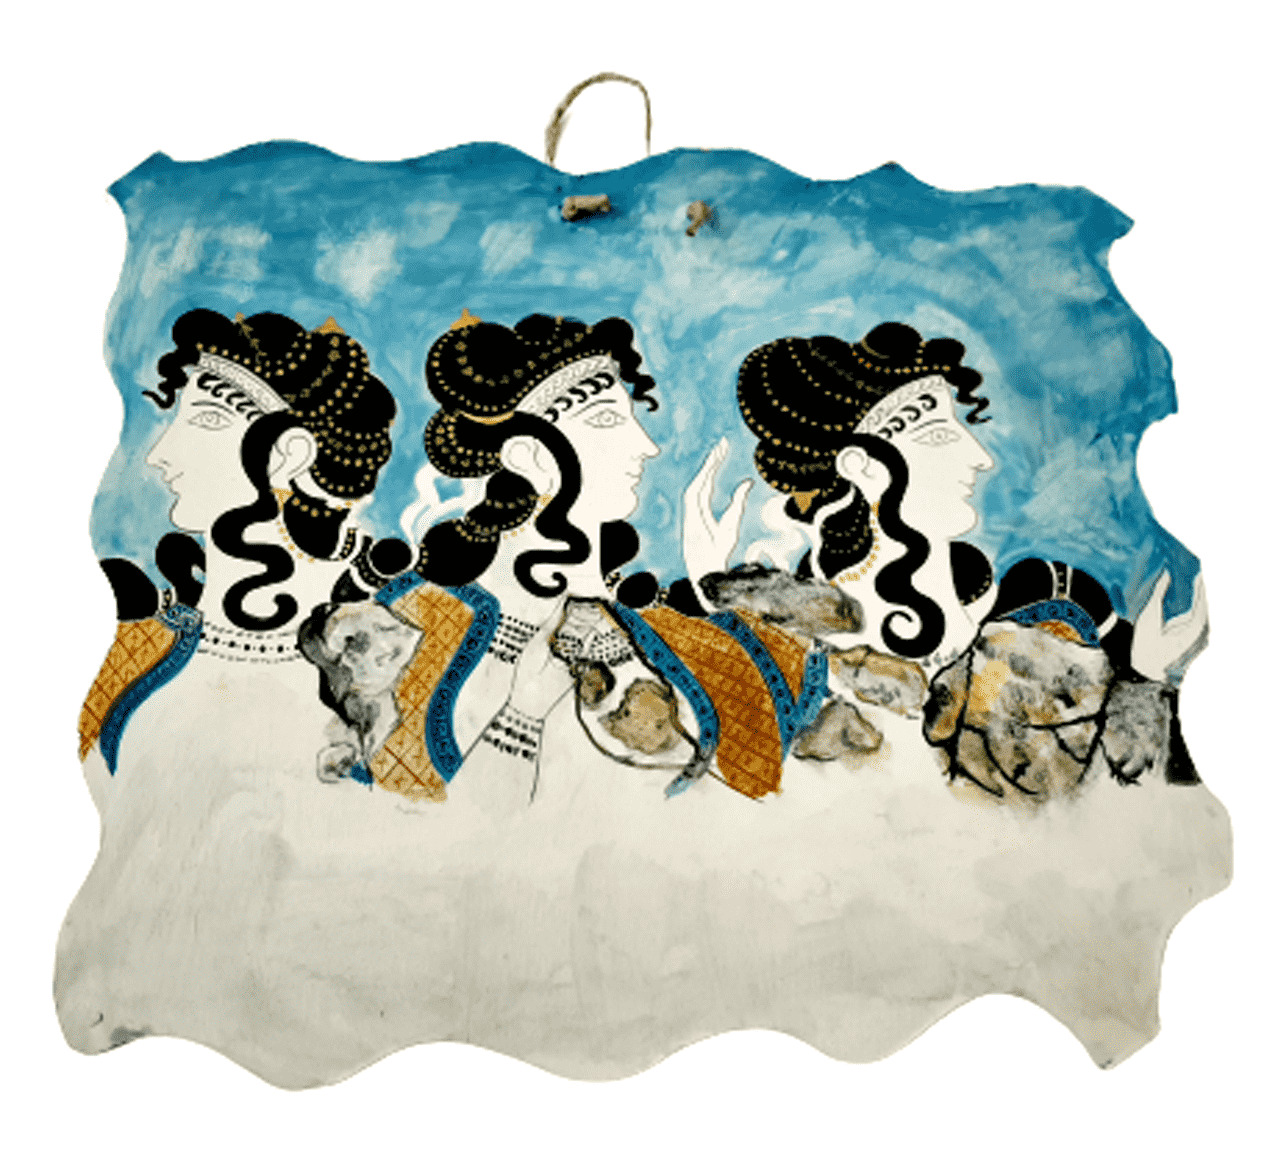 The ladies in Blue,ceramic slab,copy from fresco,from the Palace of Knossos